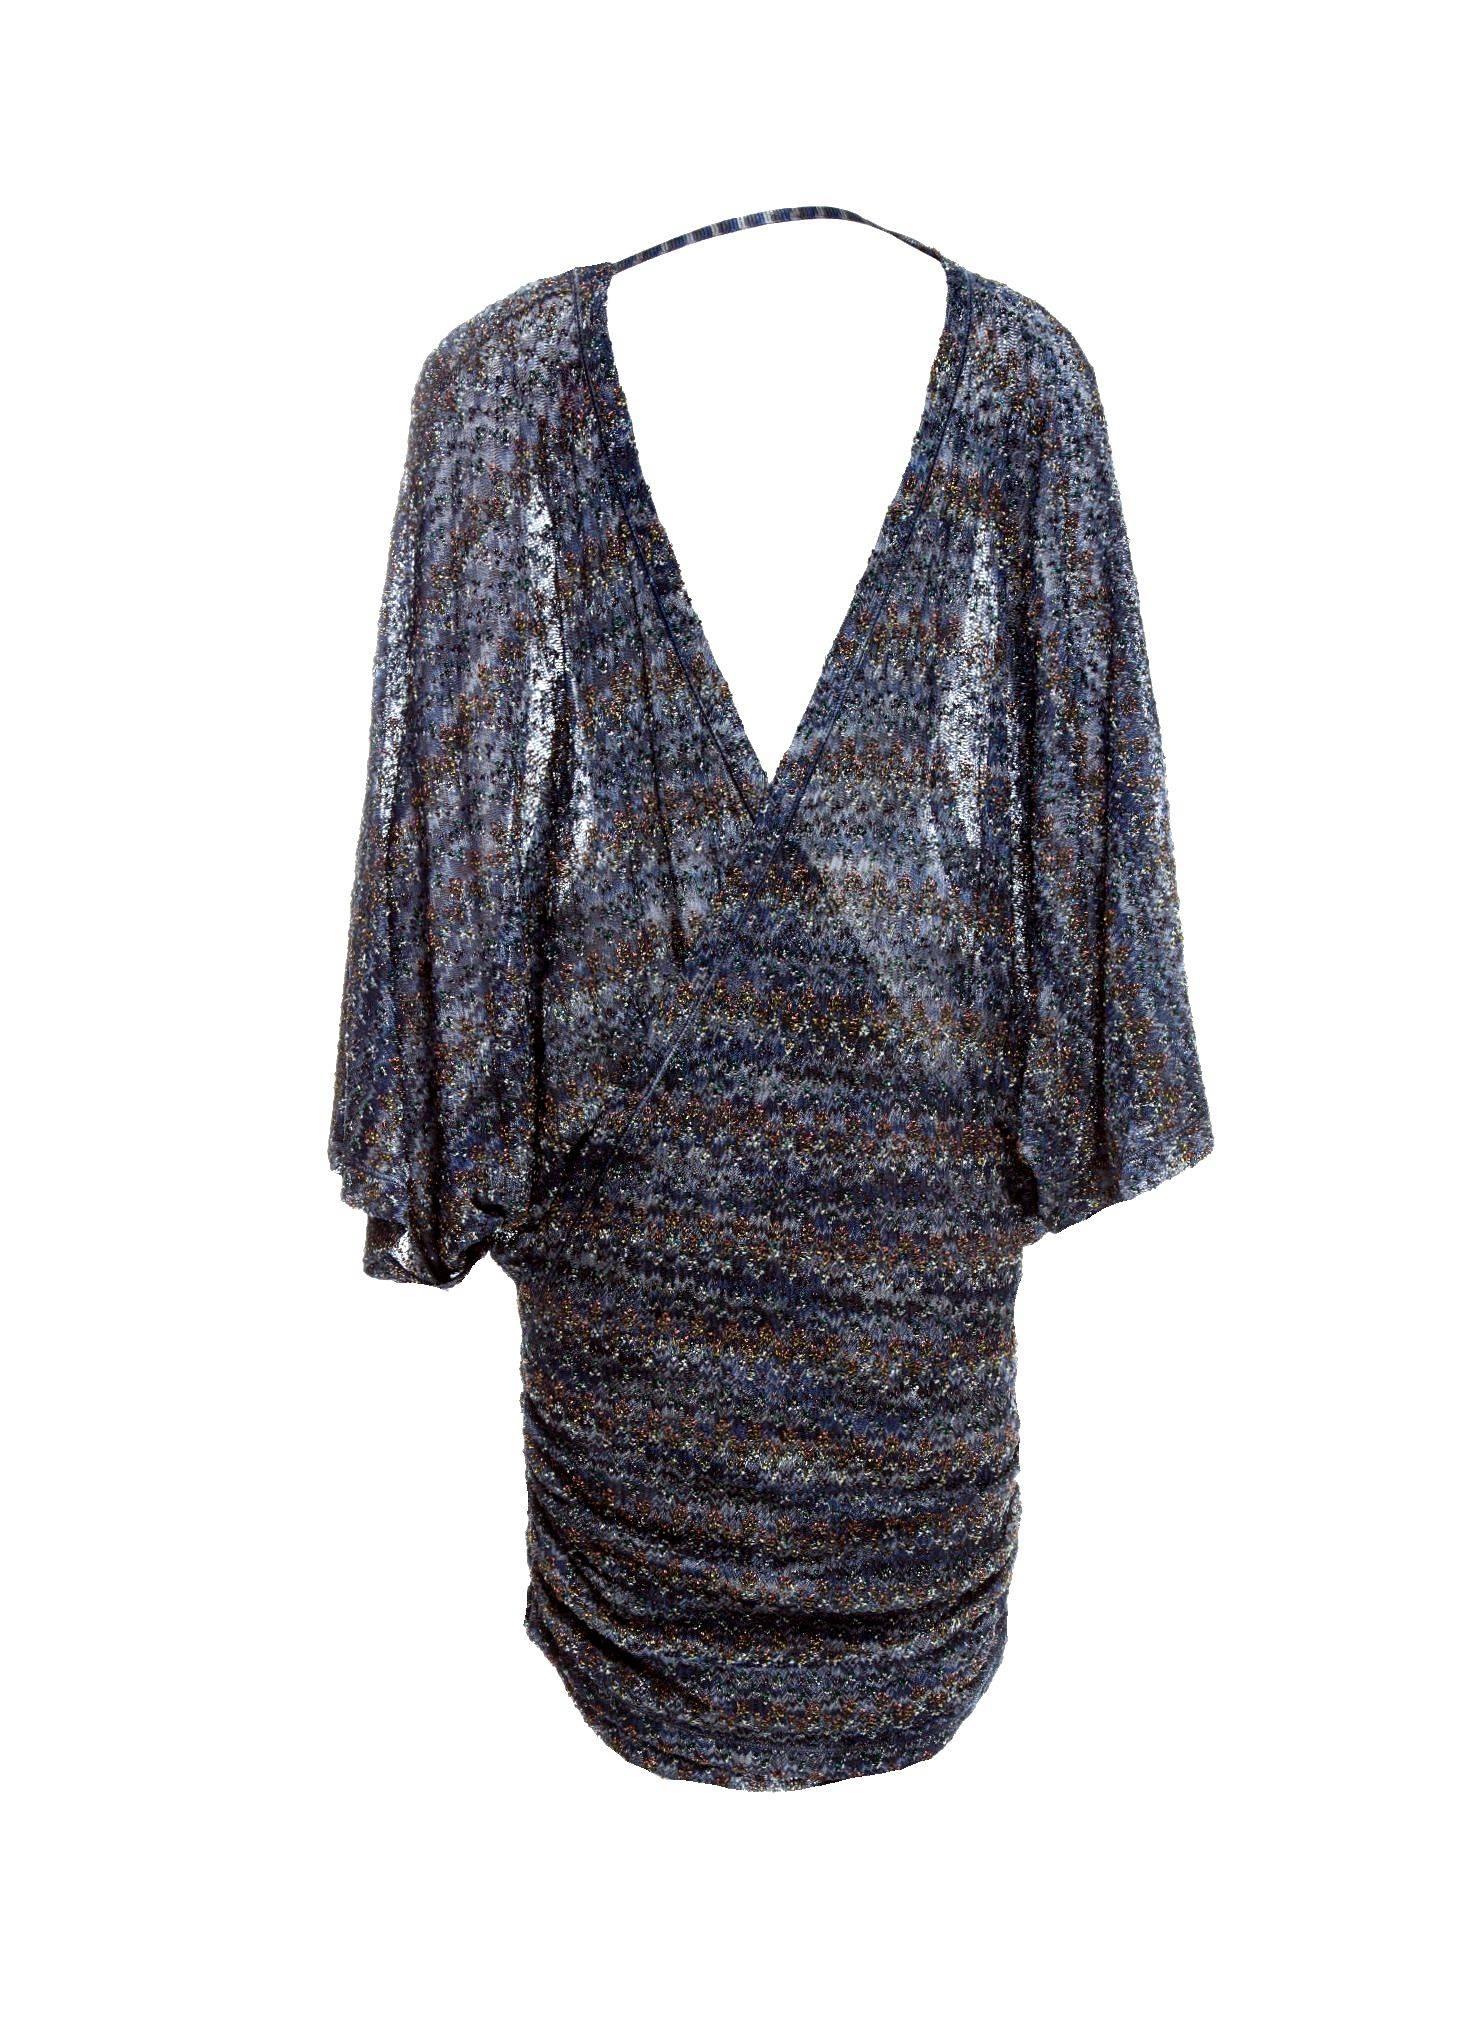 Beautiful multicolored midnight blue lurex MISSONI kaftan dress
Classic MISSONI signature knit
Simply slips on
Wrap style
V-Neck
Batwing sleeves
Crochet-knit details - so beautiful!
Dry Clean only
Made in Italy
Size 40